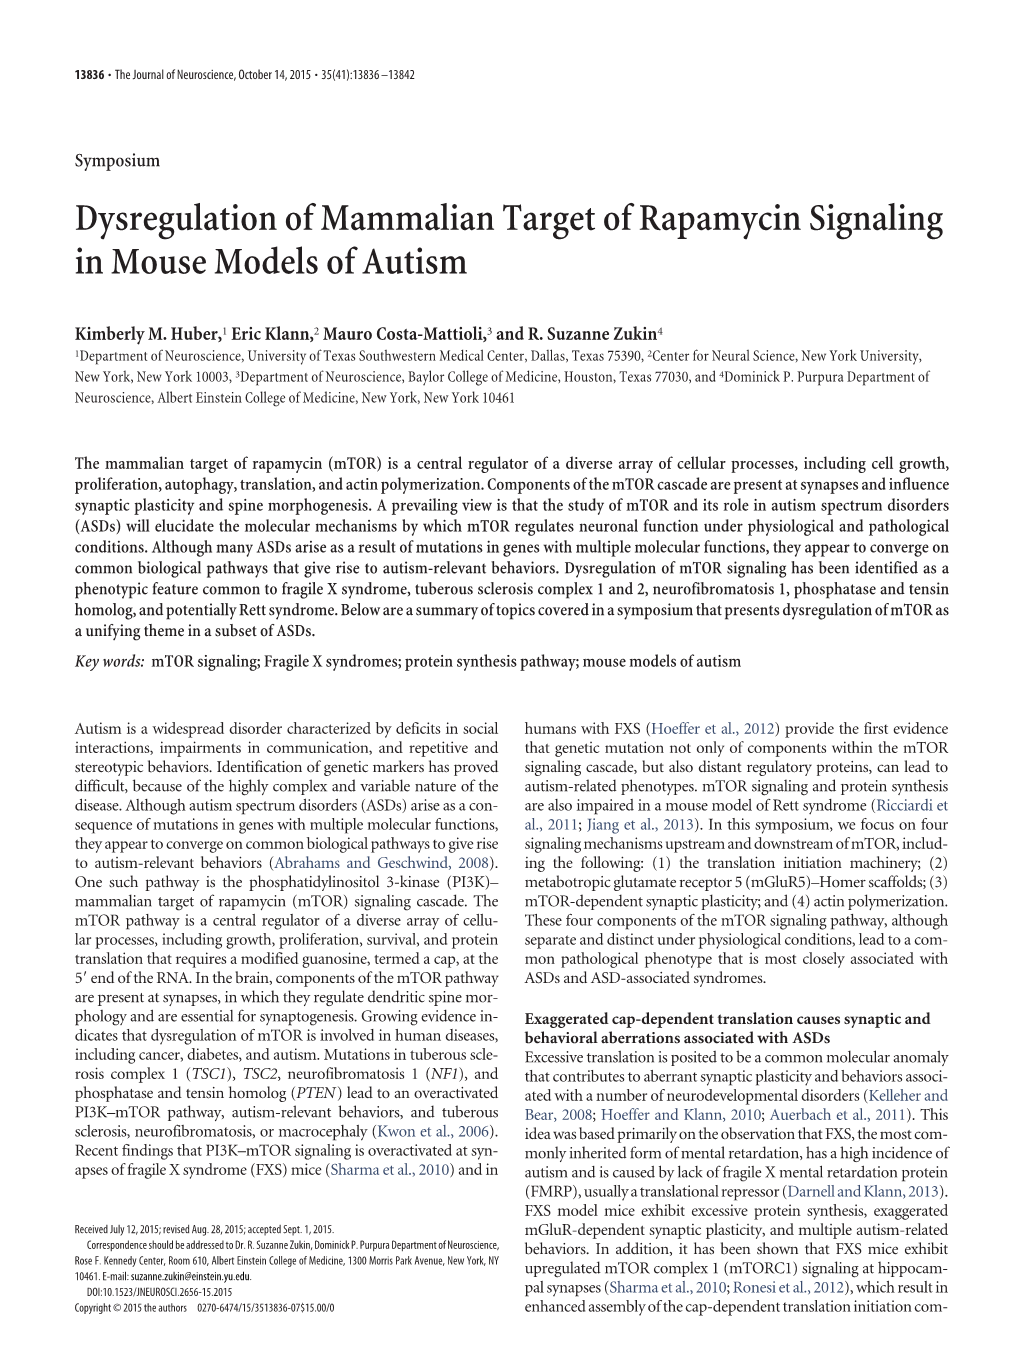 Dysregulation of Mammalian Target of Rapamycin Signaling in Mouse Models of Autism